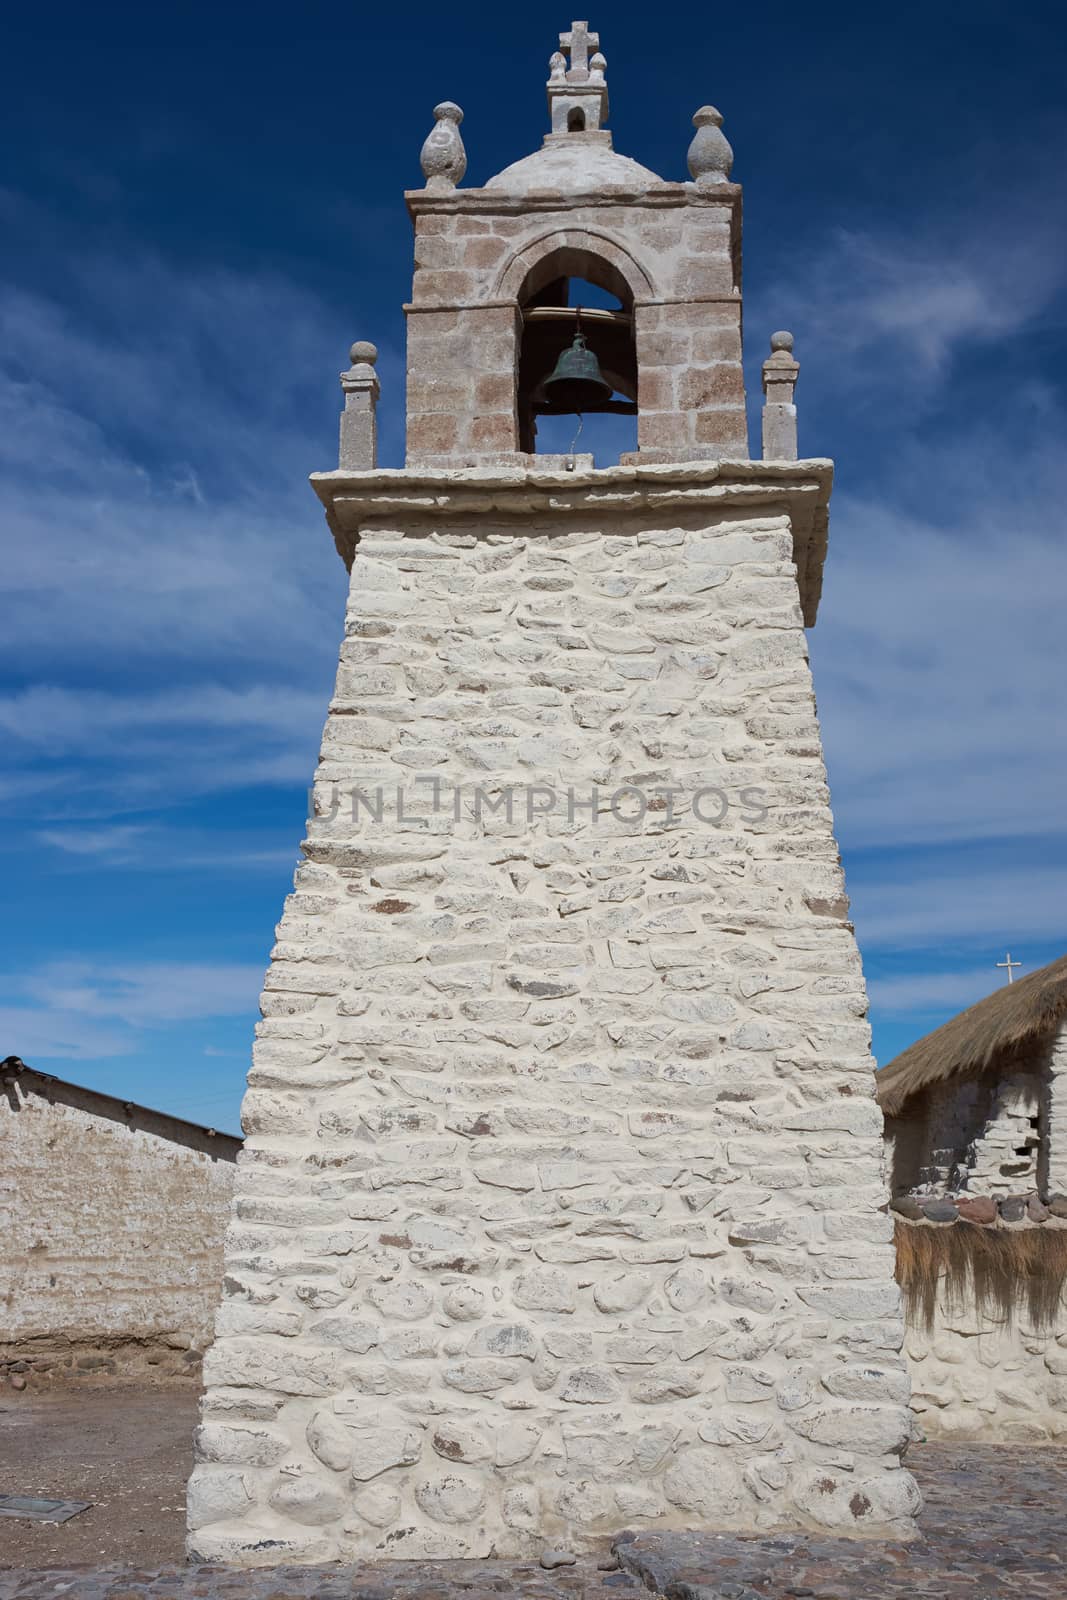 Historic church in the small village of Guallatire on the Altiplano in the Arica y Parinacota Region of Chile. The village sits at the base of the active Guallatire Volcano.